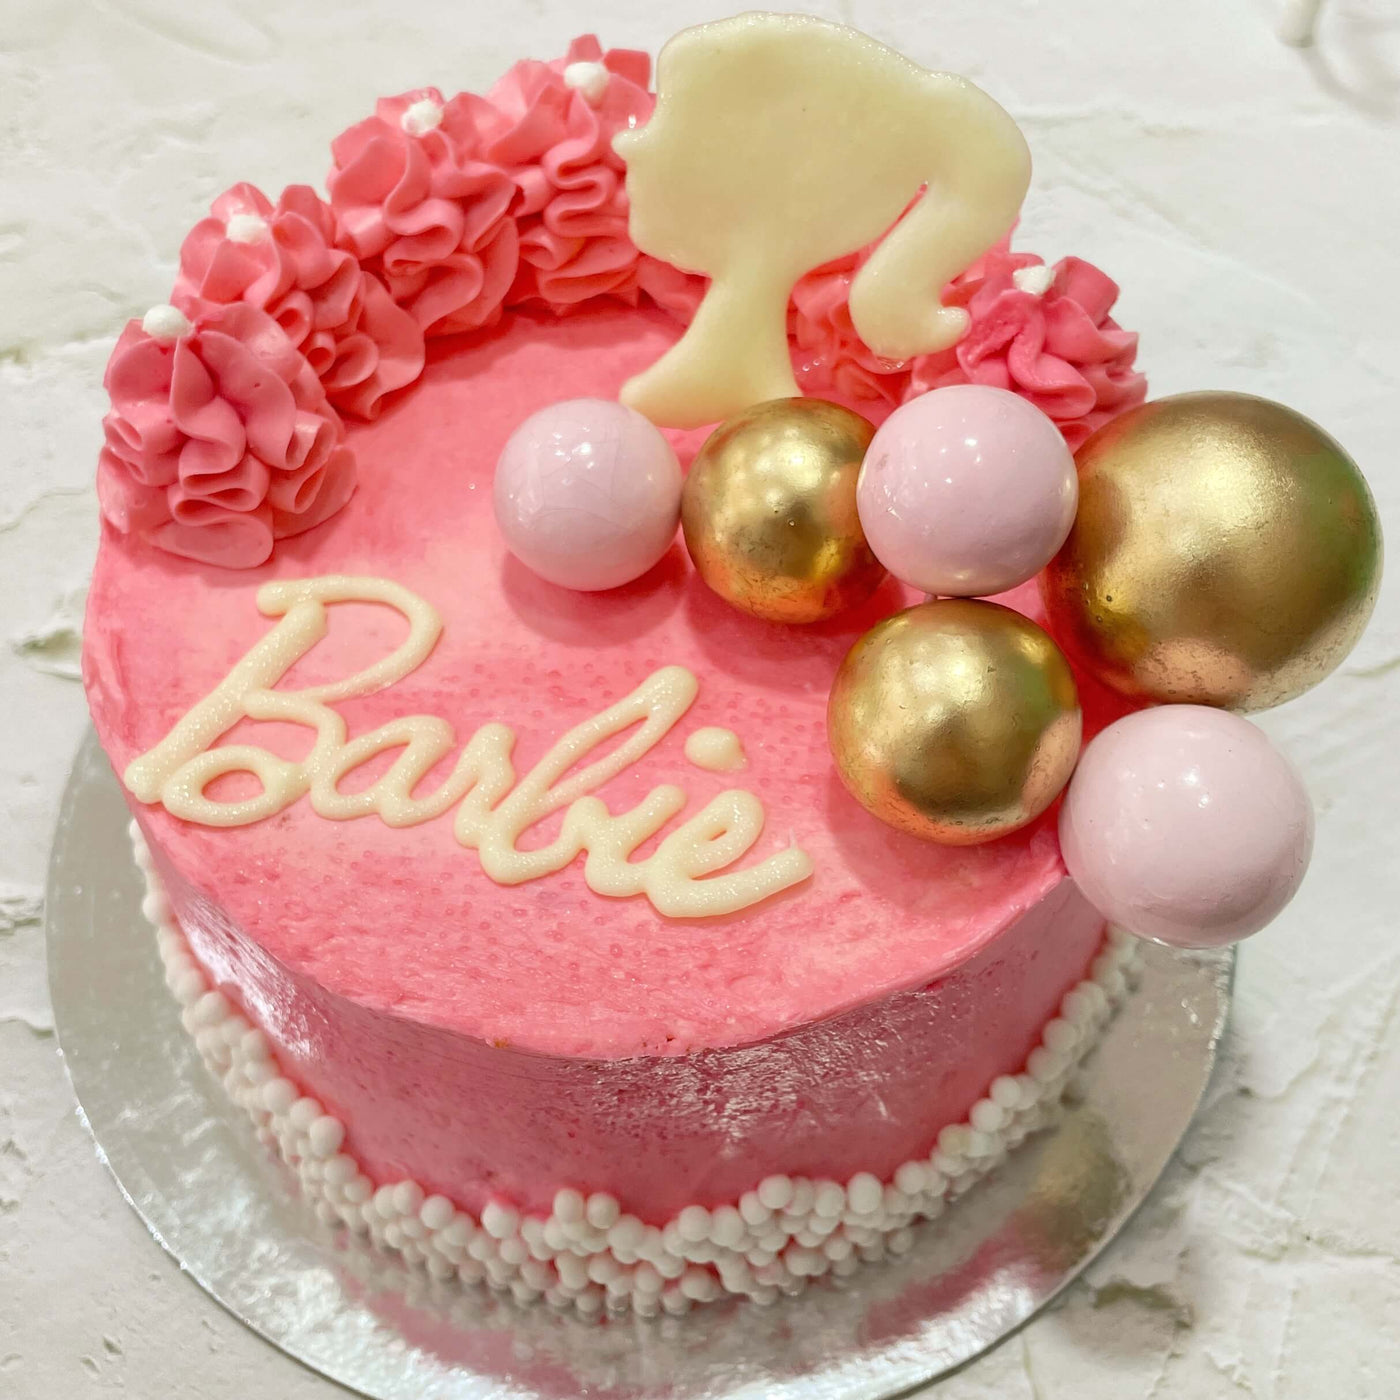 Barbie Cake 05: A Whimsical Delight for Your Special Moments